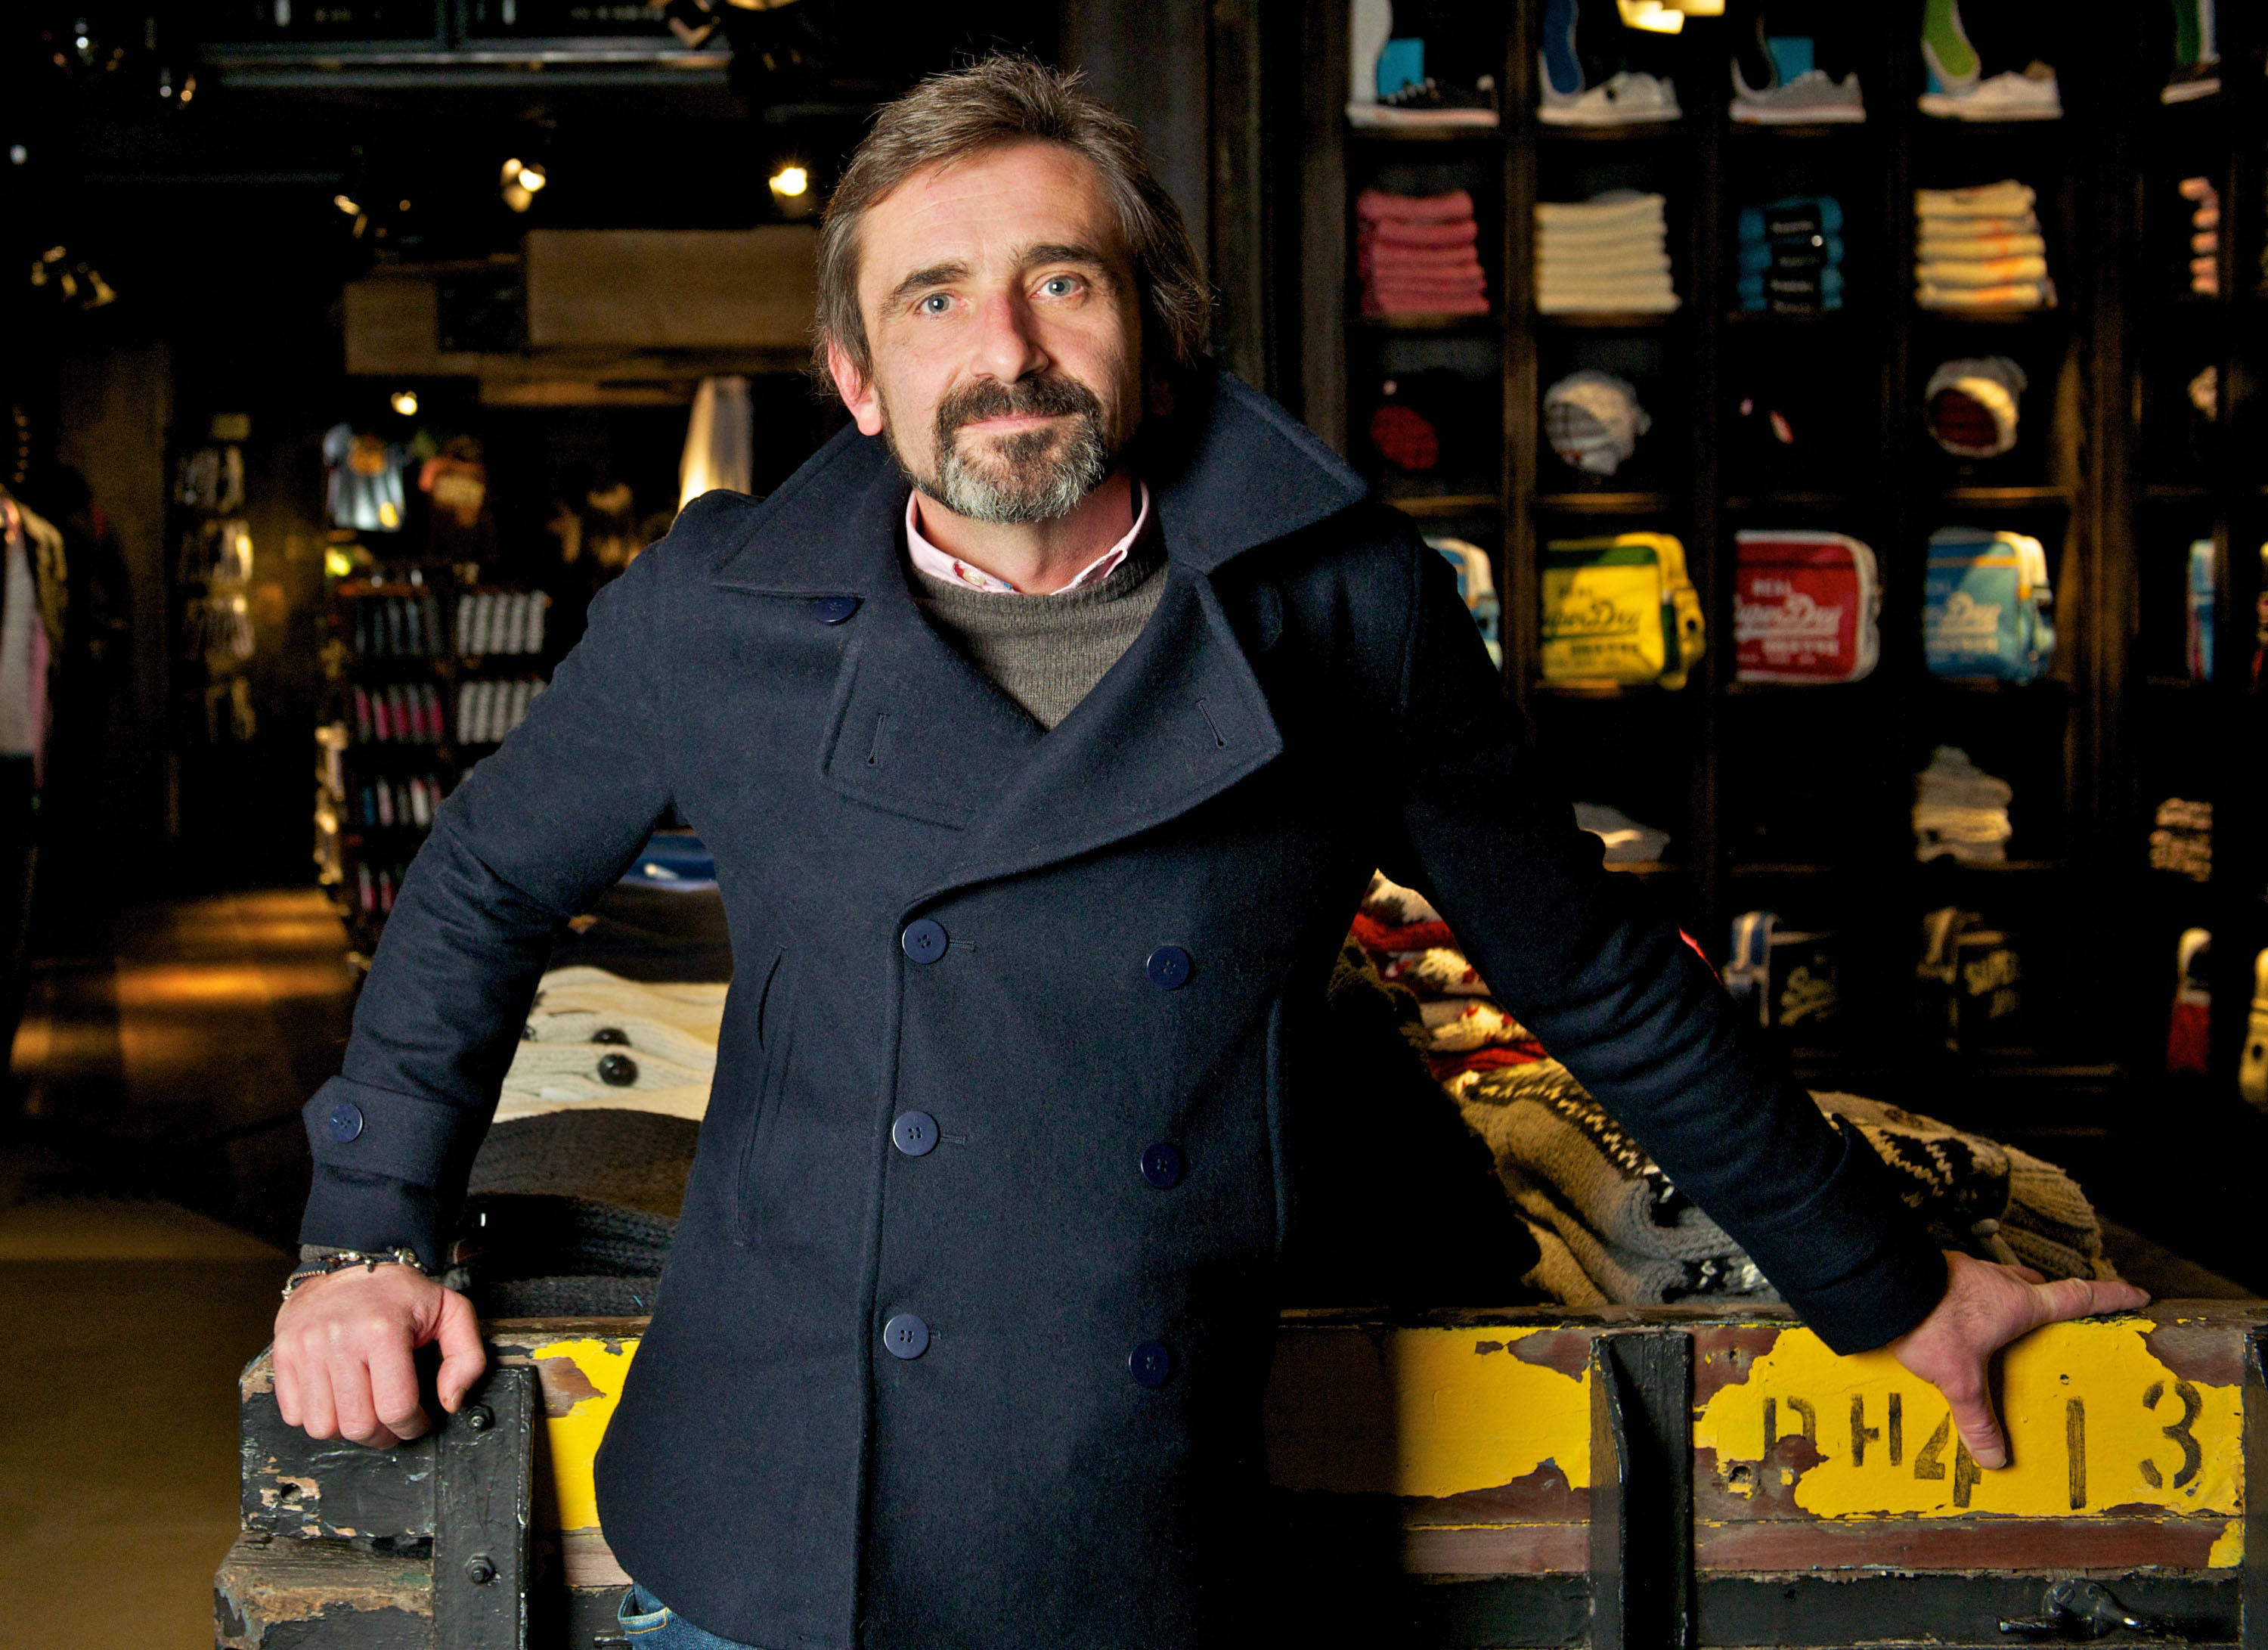 Superdry co-founder Julian Dunkerton, blamed the company’s woes on lockdown, Brexit, the end of tourist tax relief and previous management